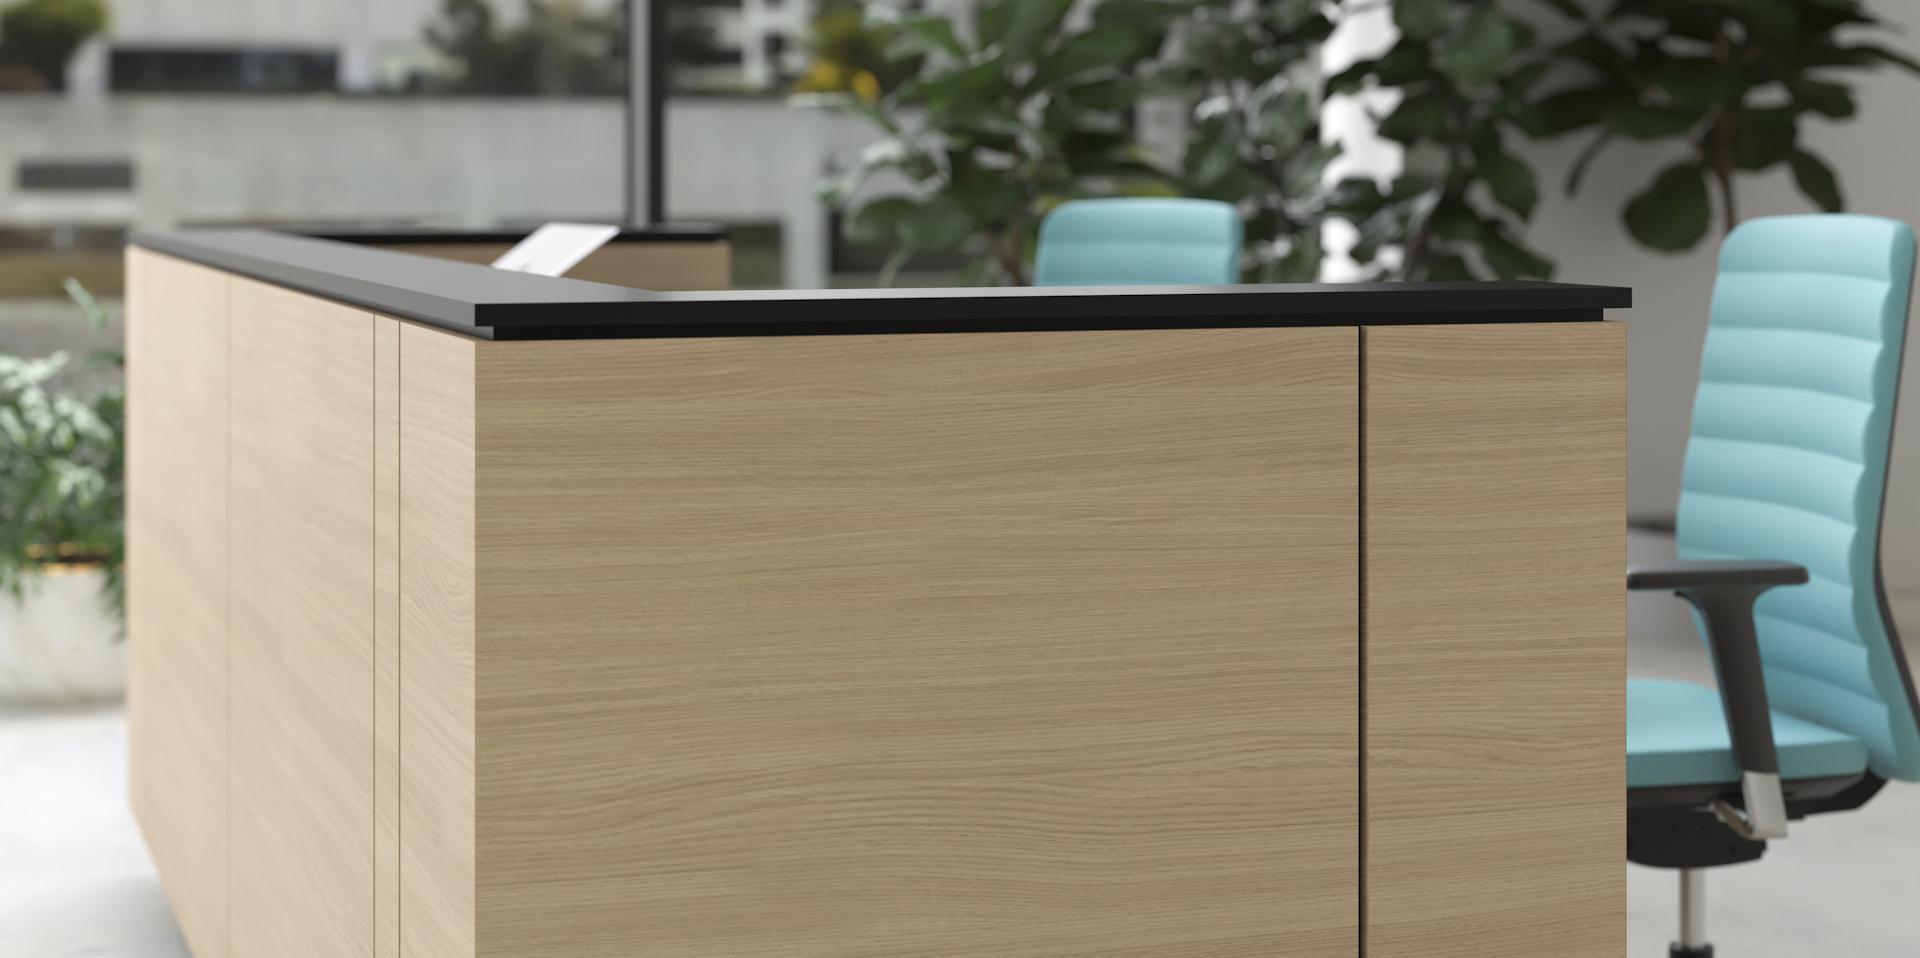 Ice Reception furniture - clean lines and minimalist aesthetic.